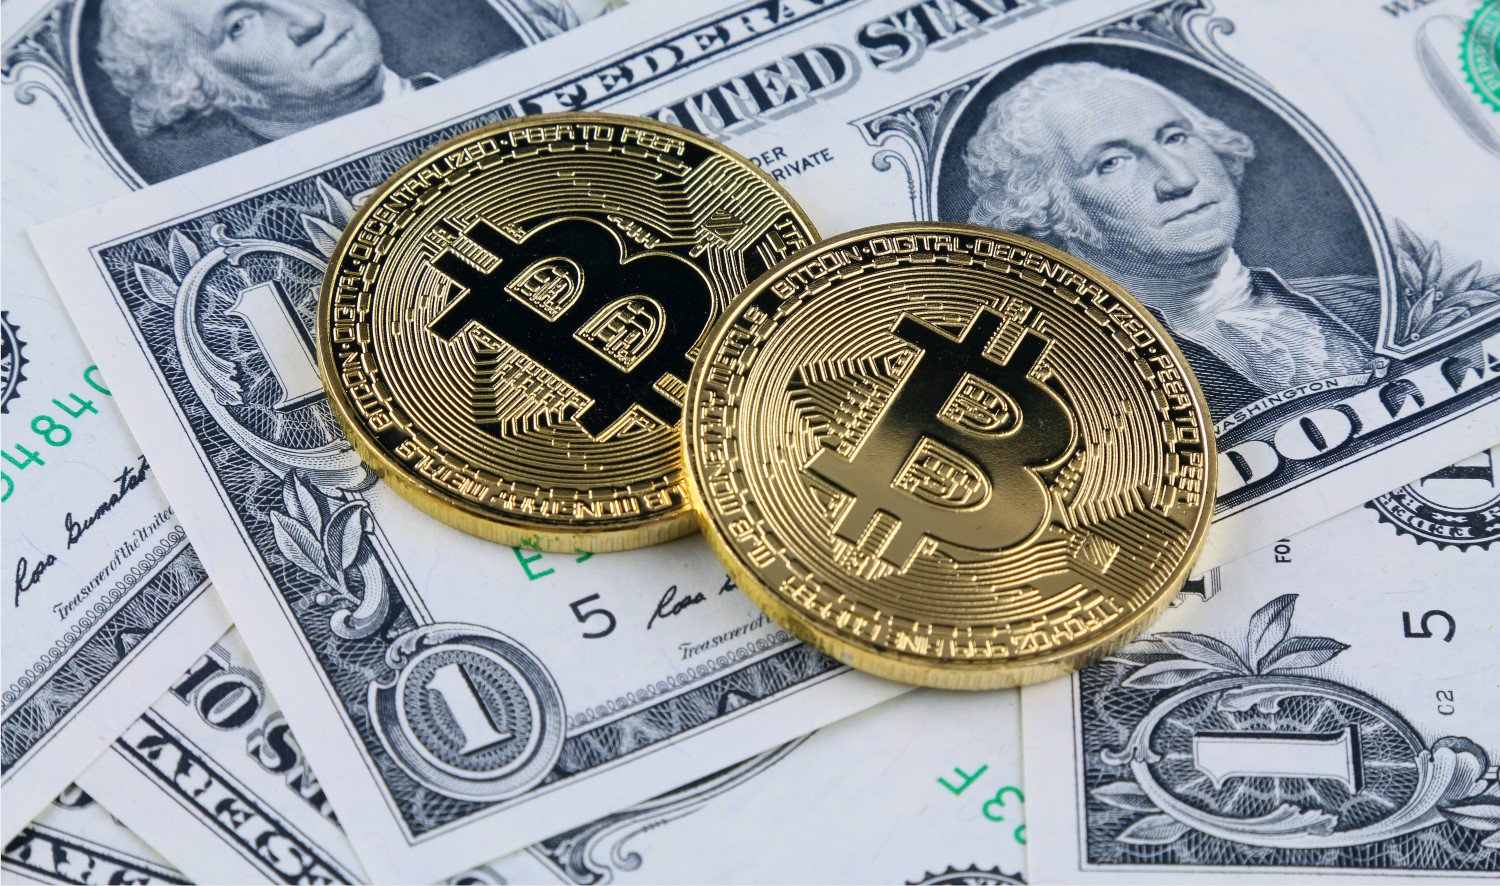 4 Reasons Why Bitcoin’s Price Could Now Drop To $6K